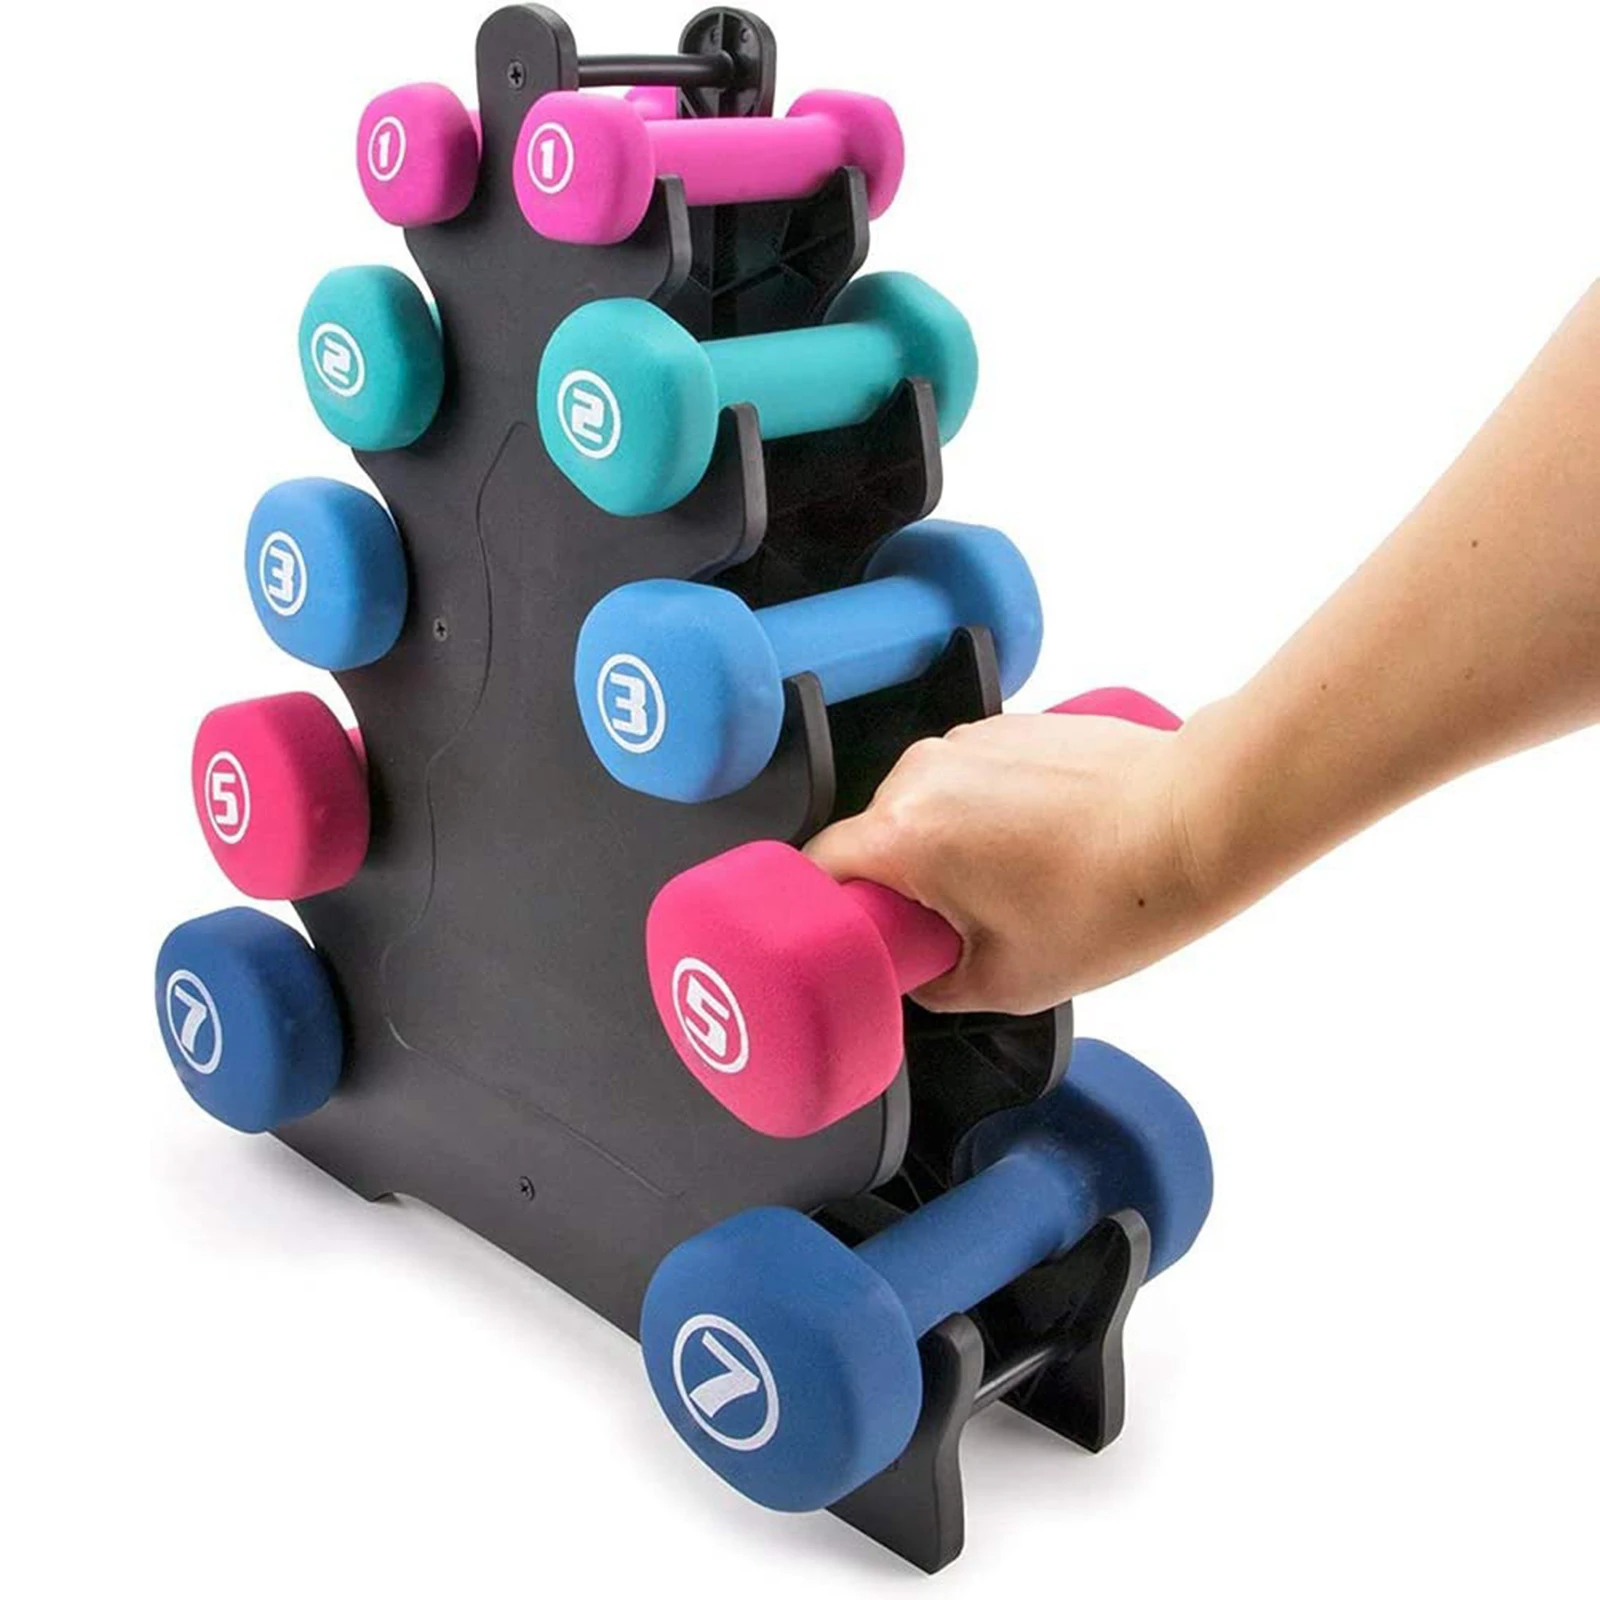 QINGXIANG Fitness Space Saving Storage Holder Portable Dumbbell Rack Home Gym Exercise Accessories Organizer 5 Layers Vertical Office 